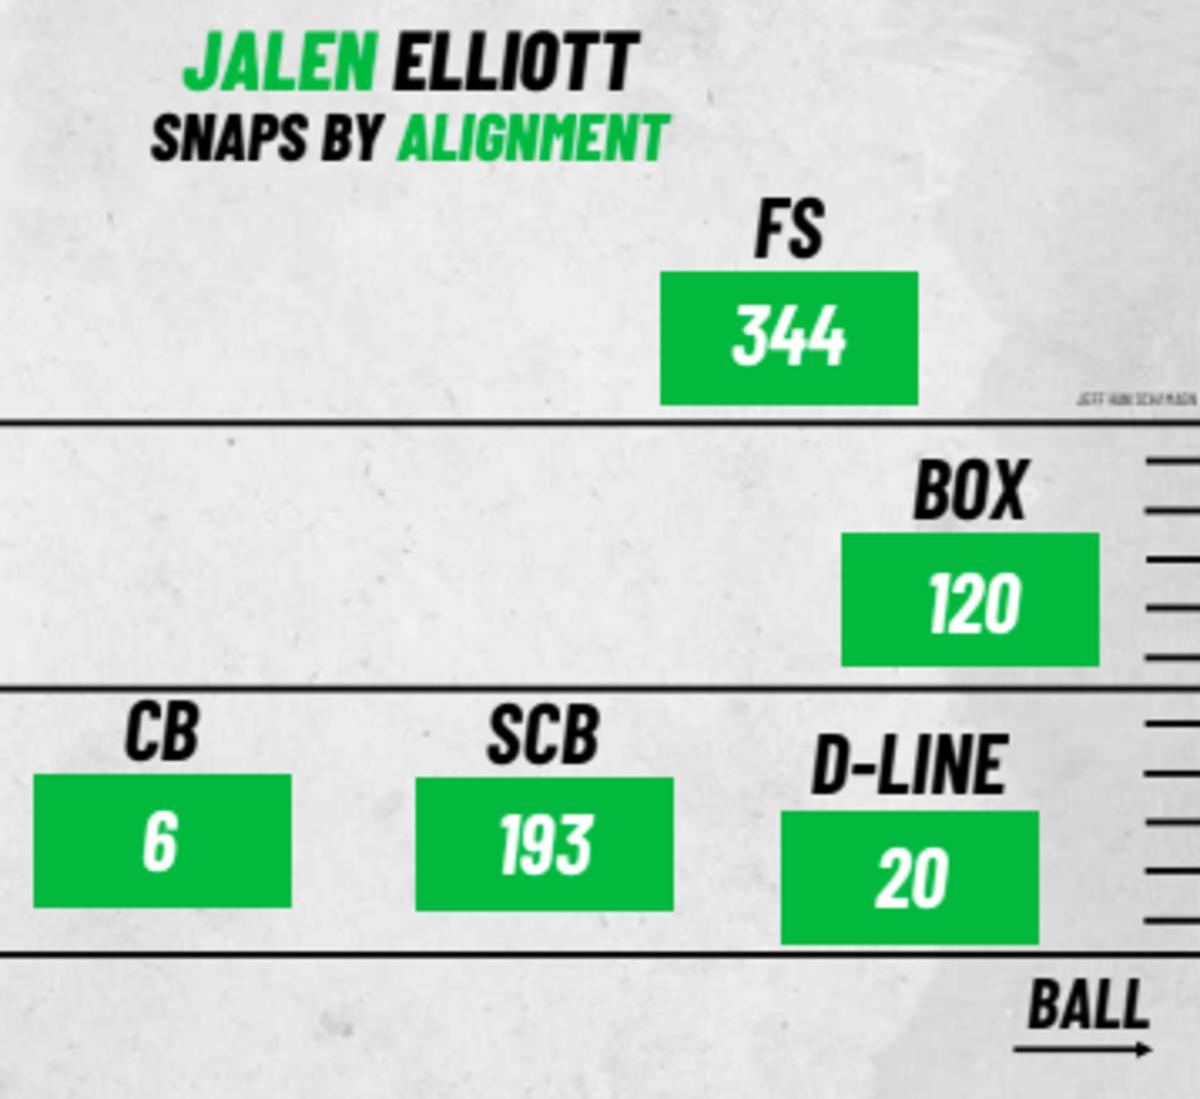 Where Elliott lined up during his college career. He has a lot of snaps at slot corner. Provided by PFF.